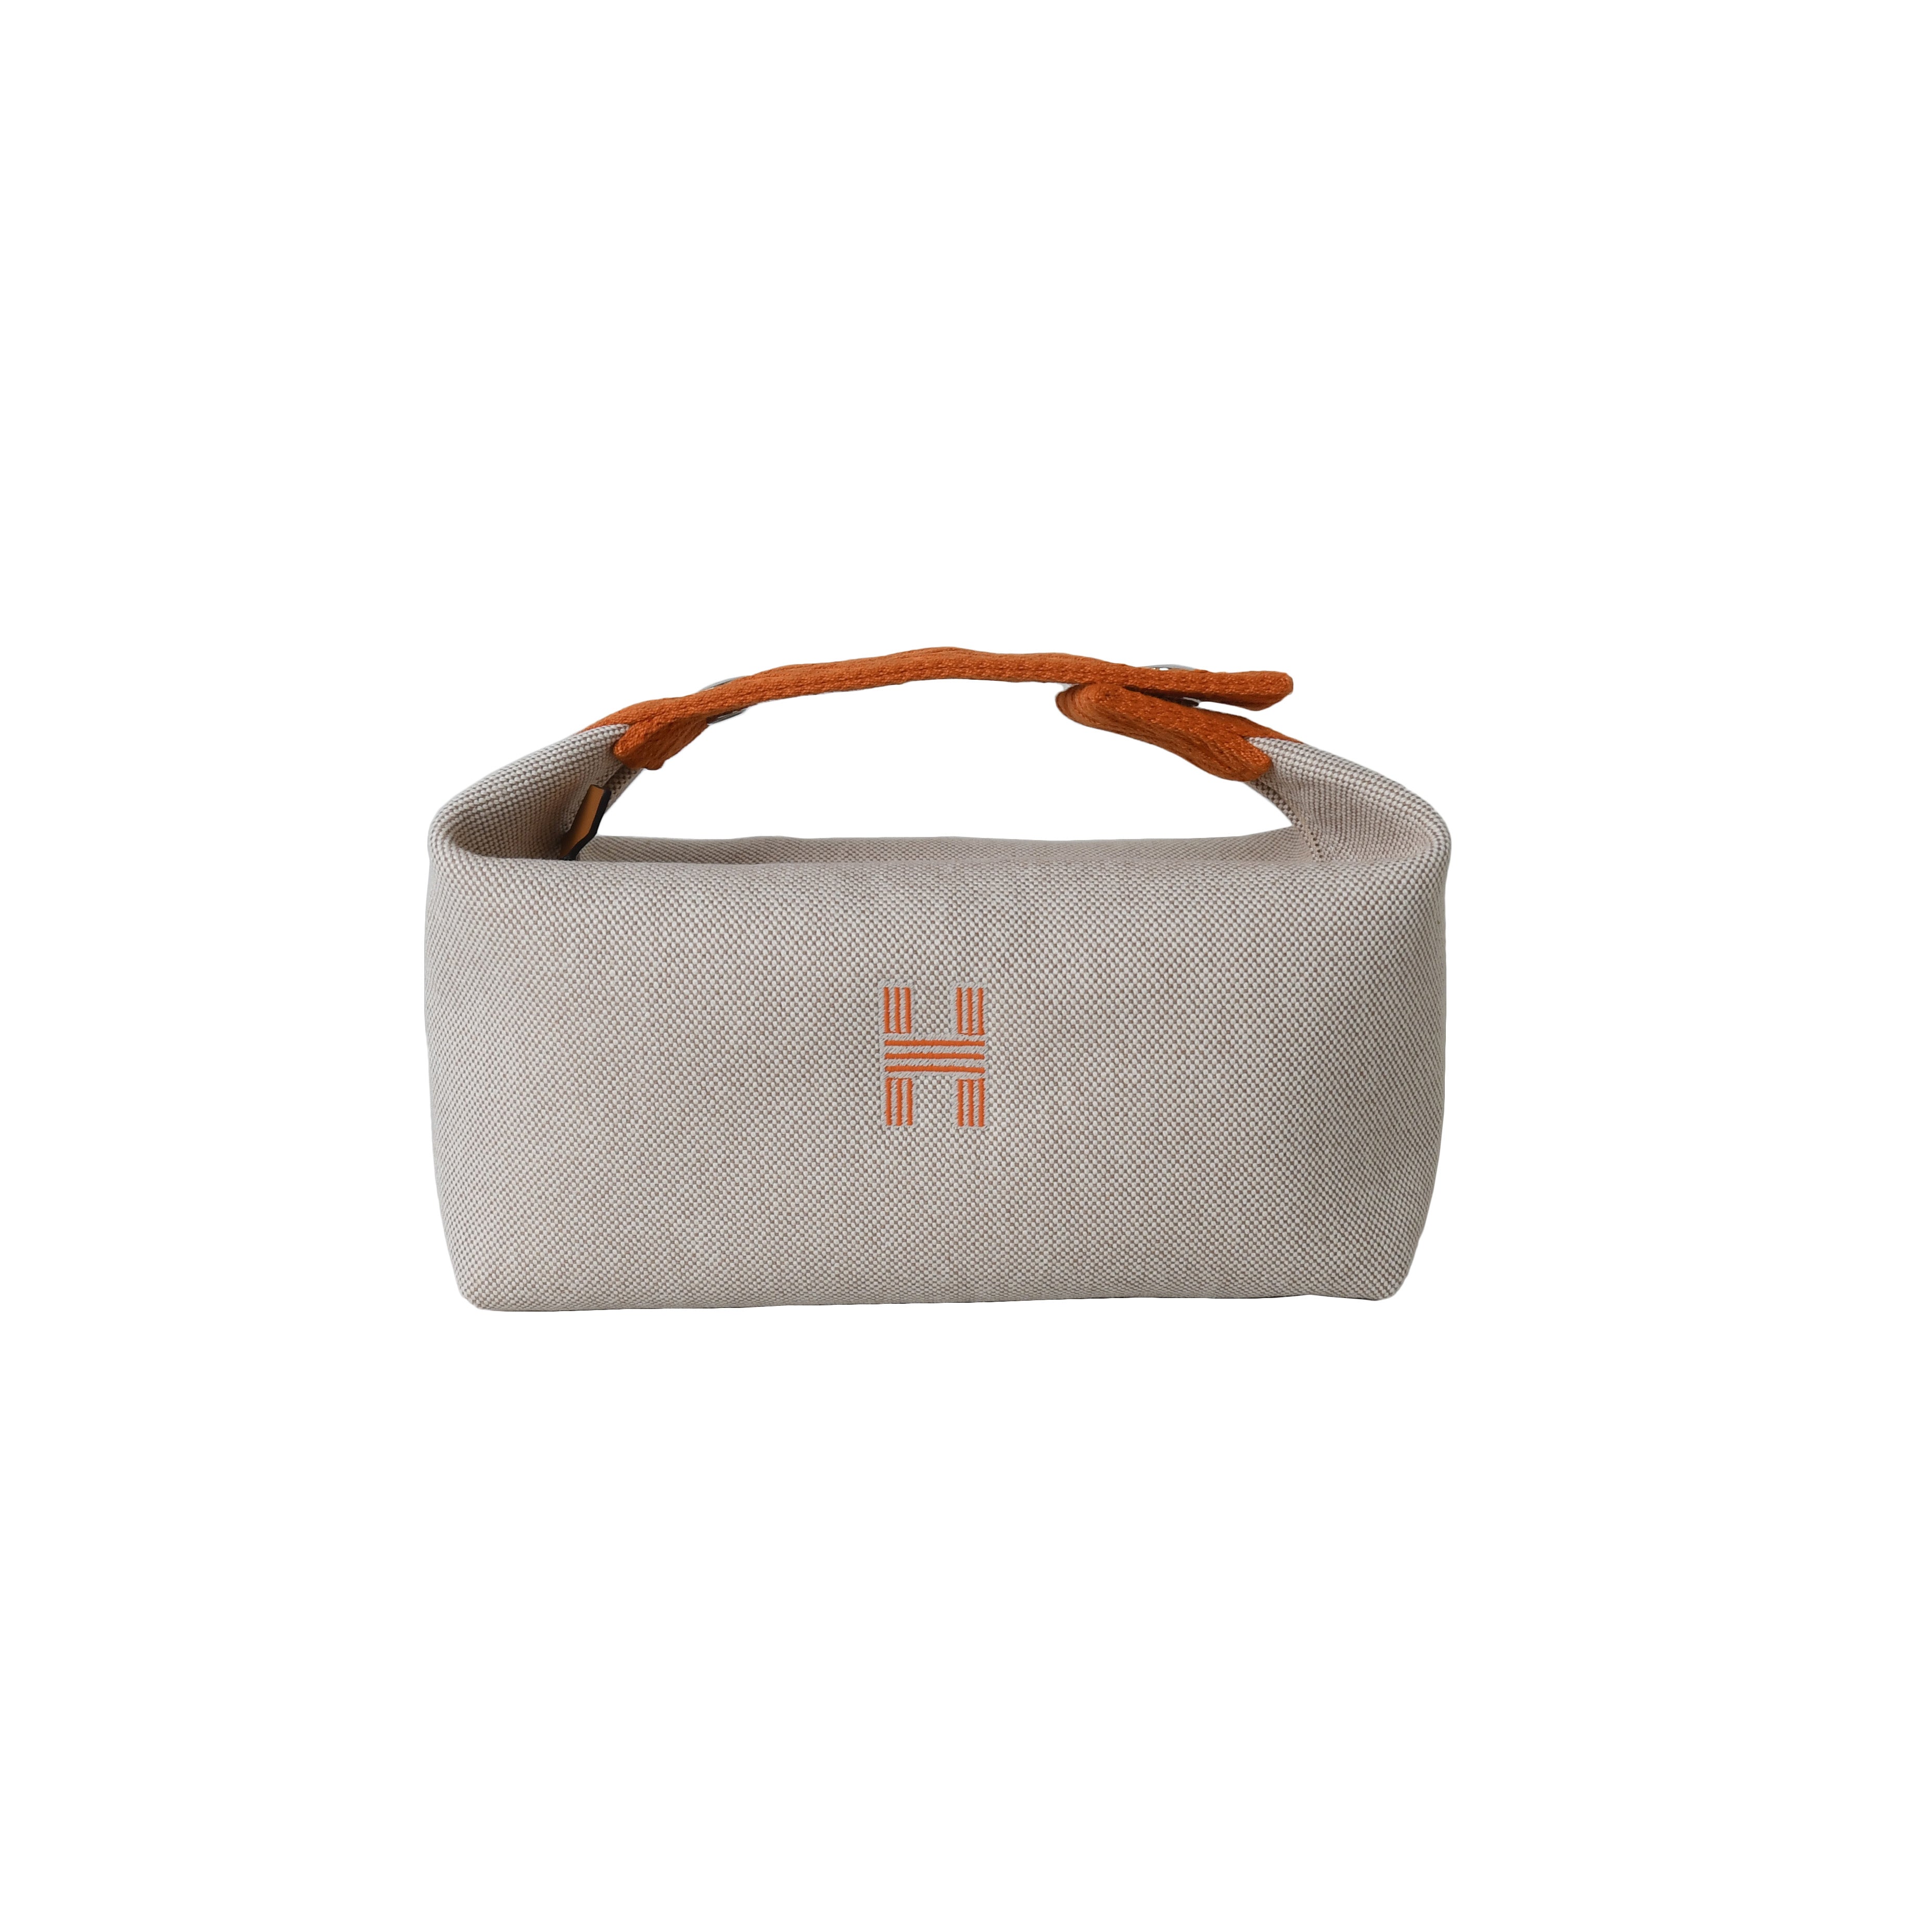 Hermes Bride A Brac Large, Beige and Taupe Canvas, New No Dustbag